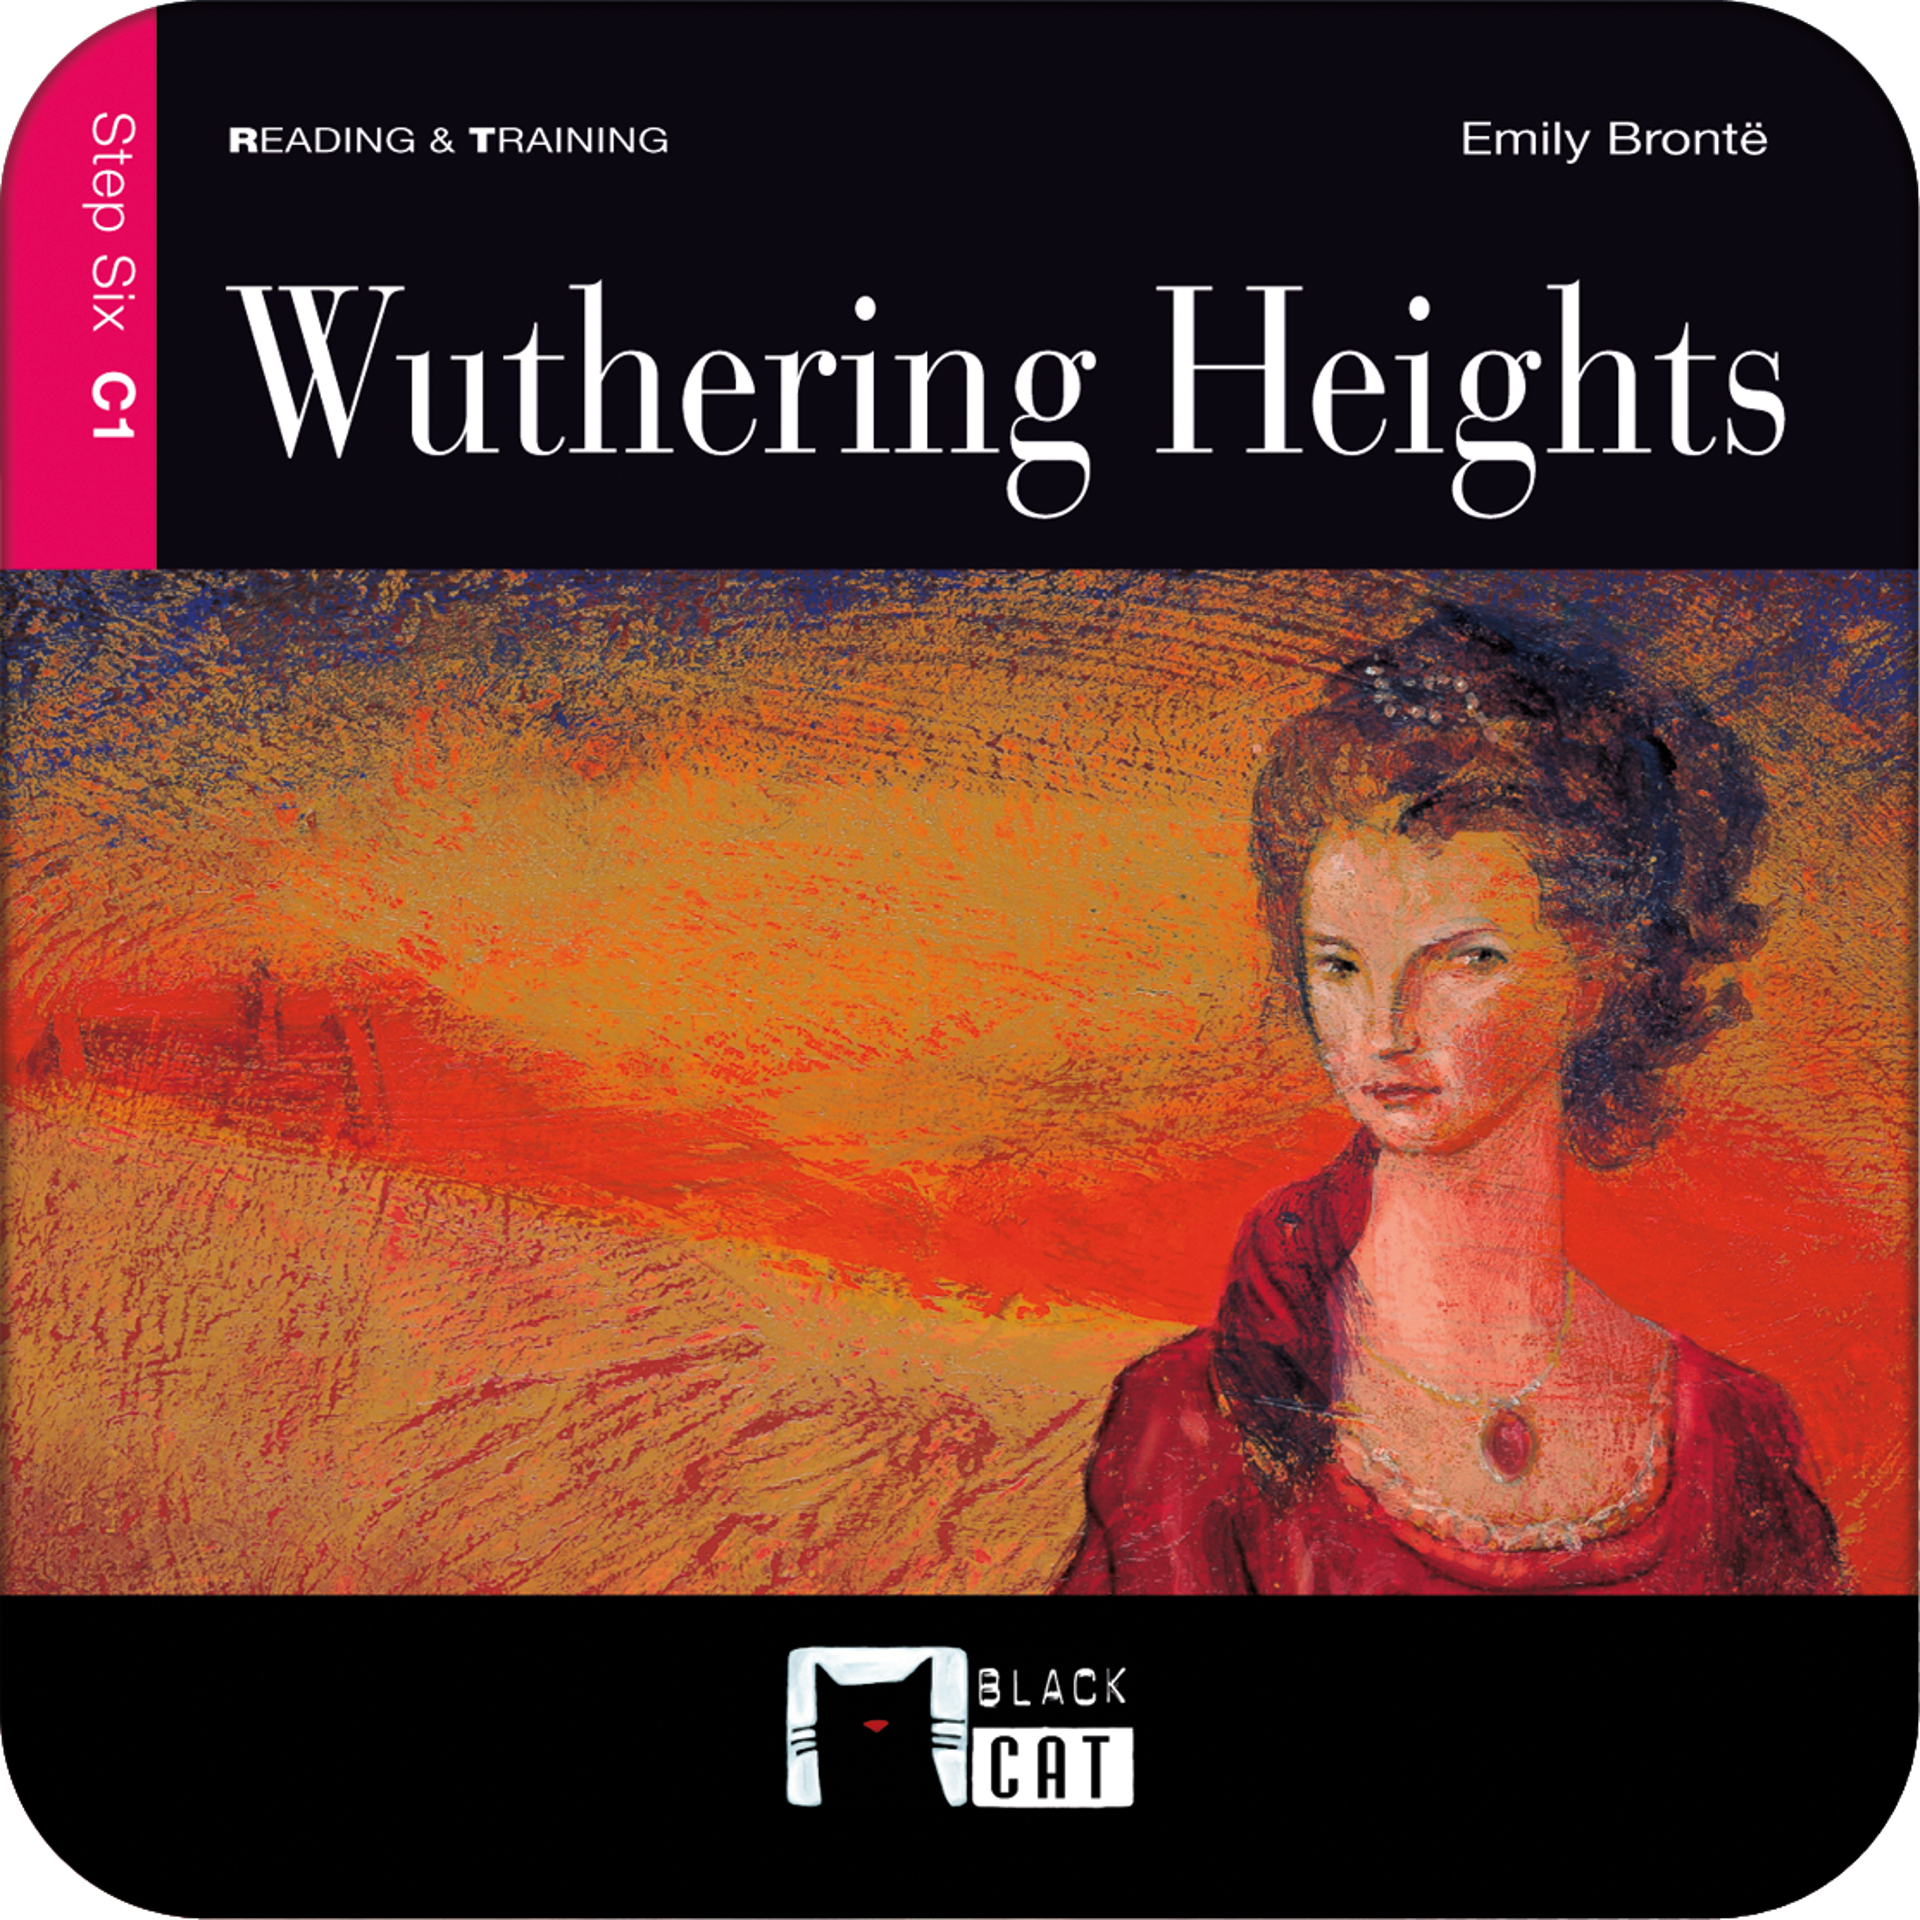 Wuthering Heights. (Digital)